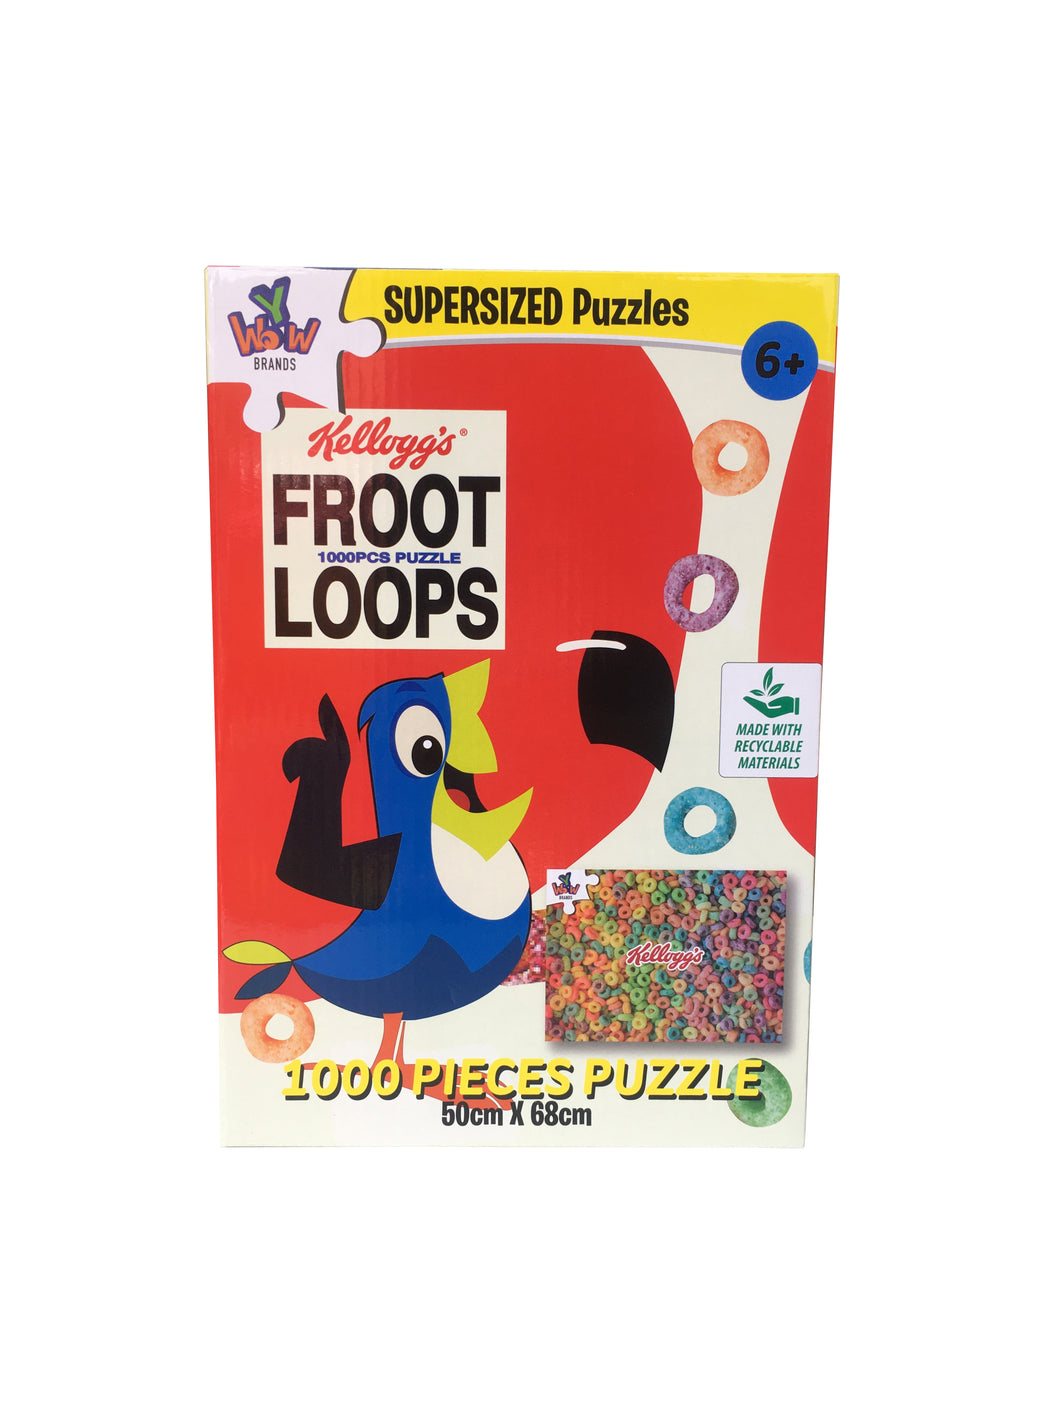 Super-Sized 1000 Piece Puzzle - Kellogg's - Froot Loops